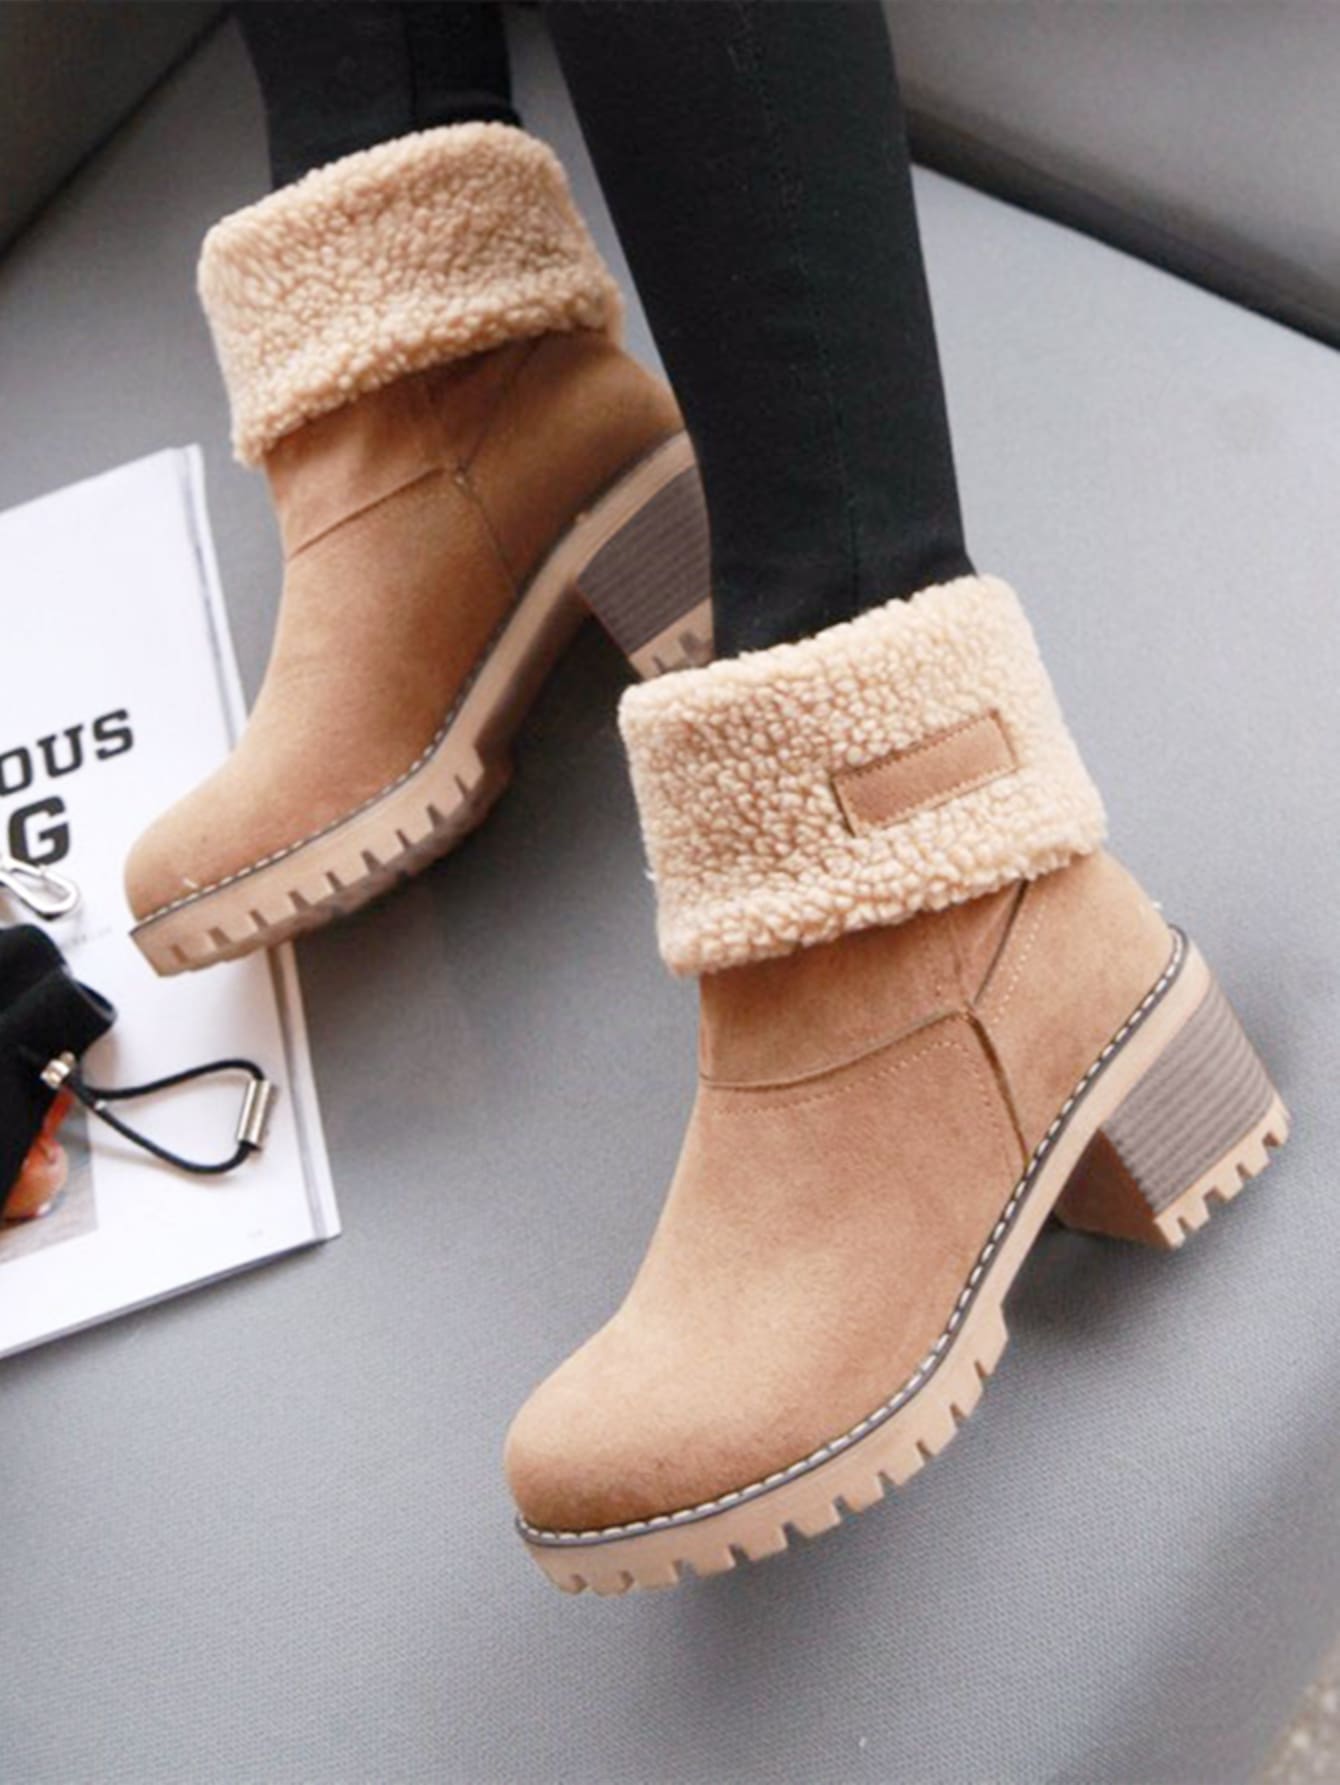 Suede Cotton Lining Chunky Heeled Snow Boots